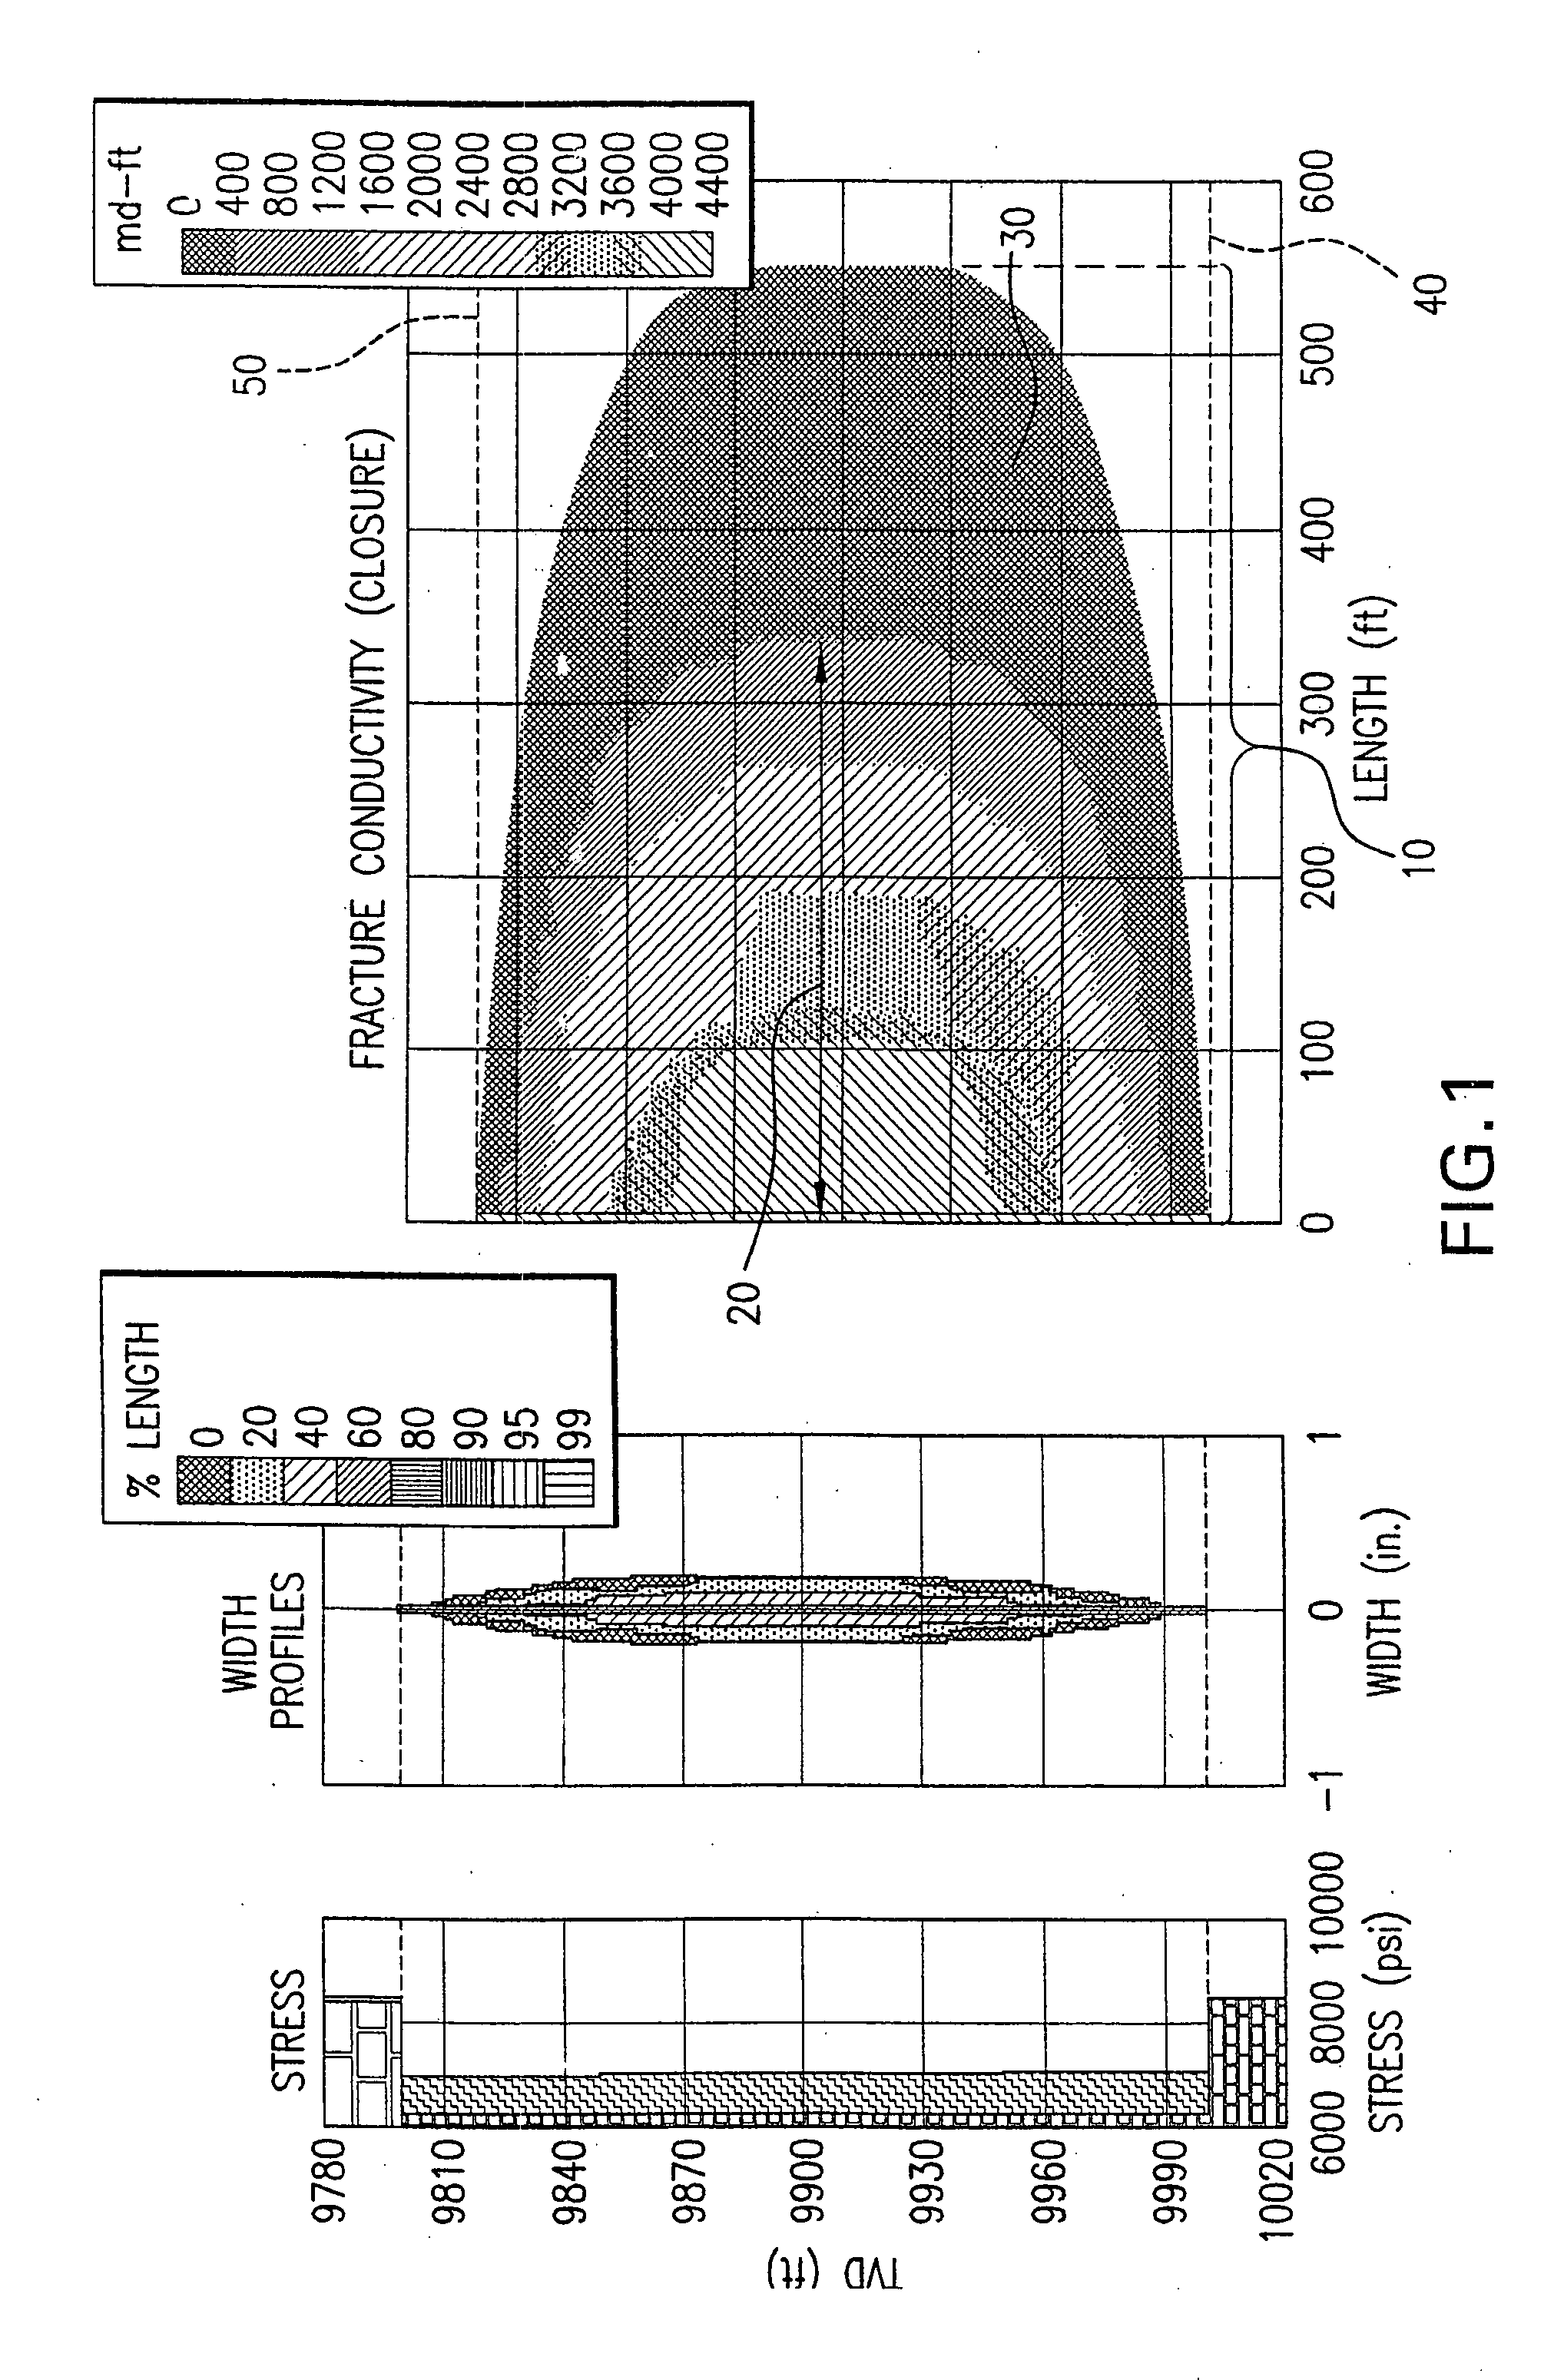 Method of treating subterranean formations using mixed density proppants or sequential proppant stages